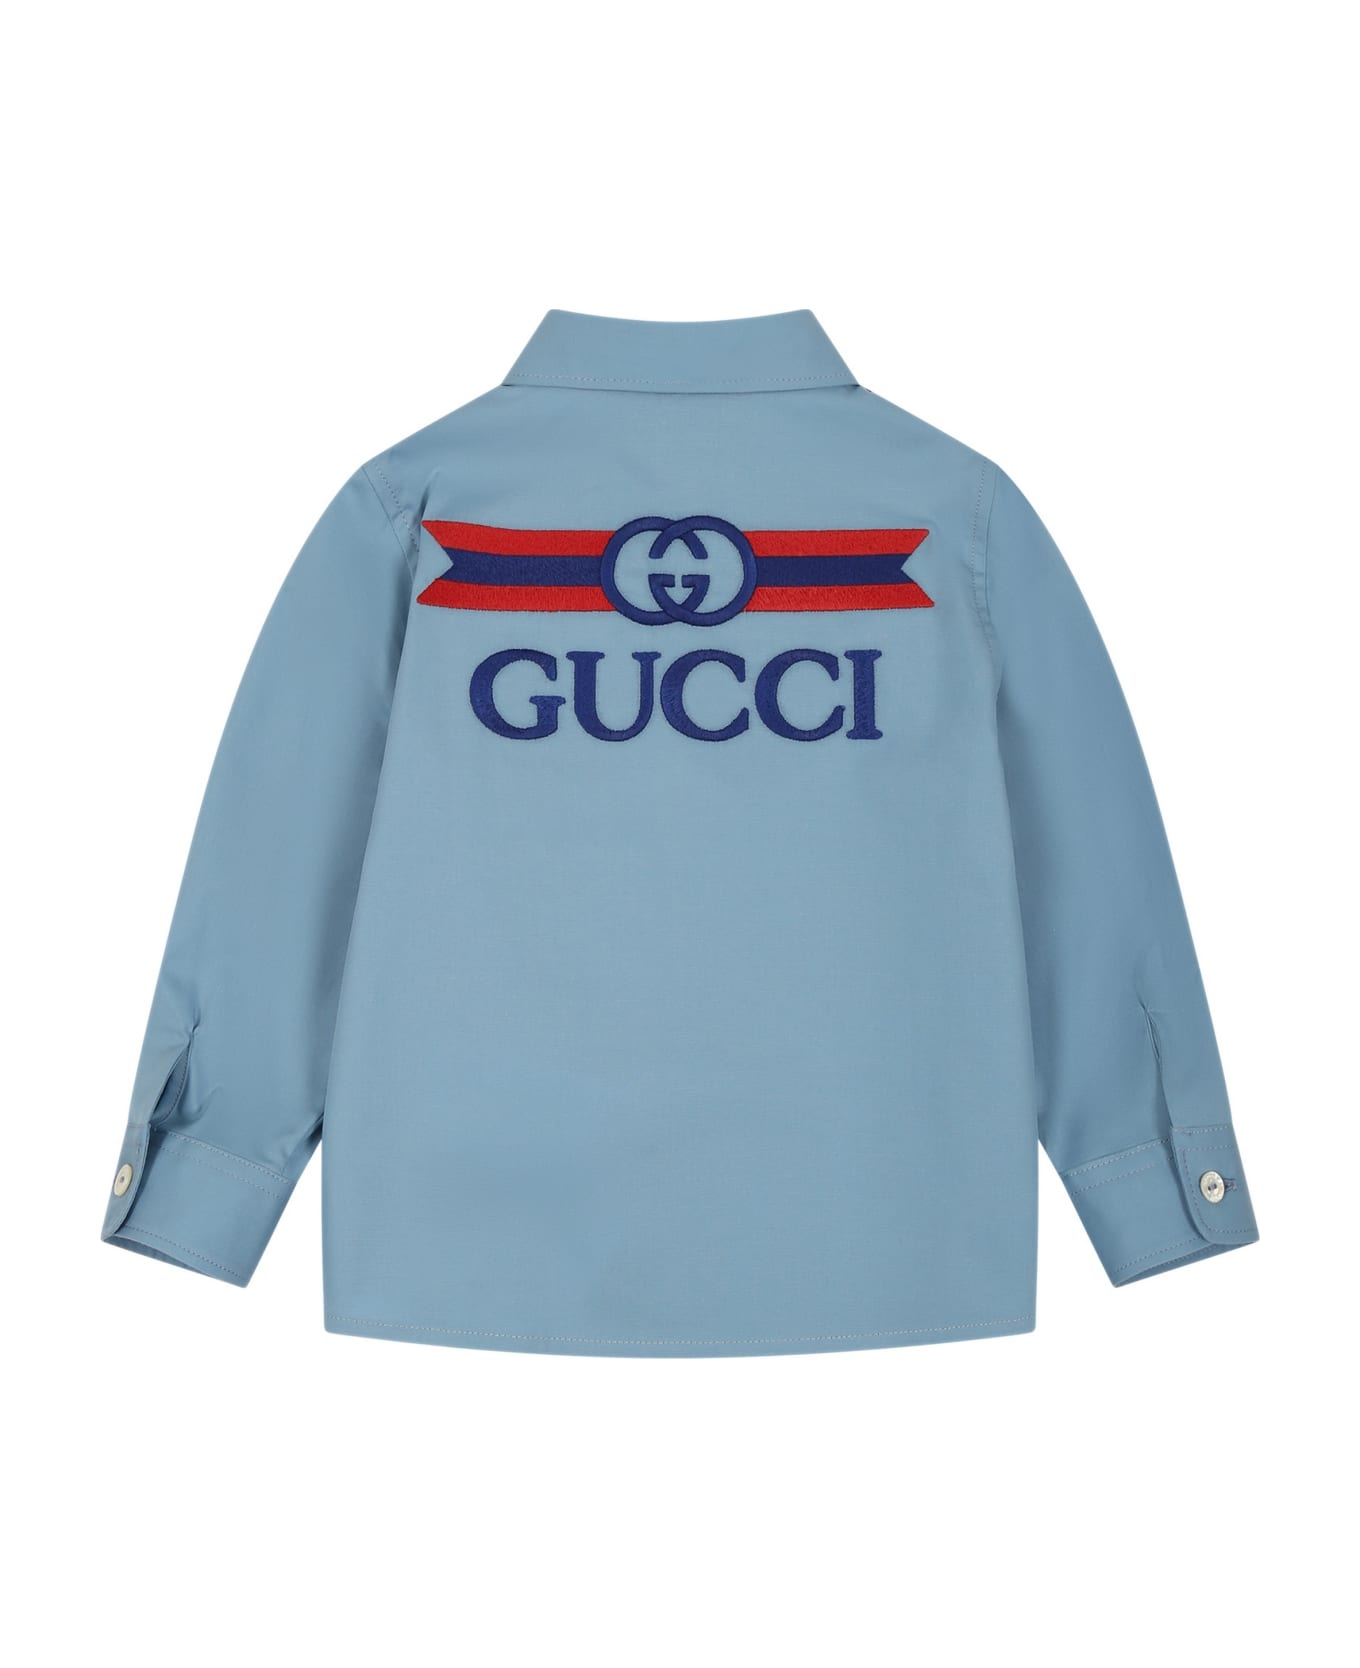 Gucci Light Blue Shirt For Baby Boy With Double G - Light Blue